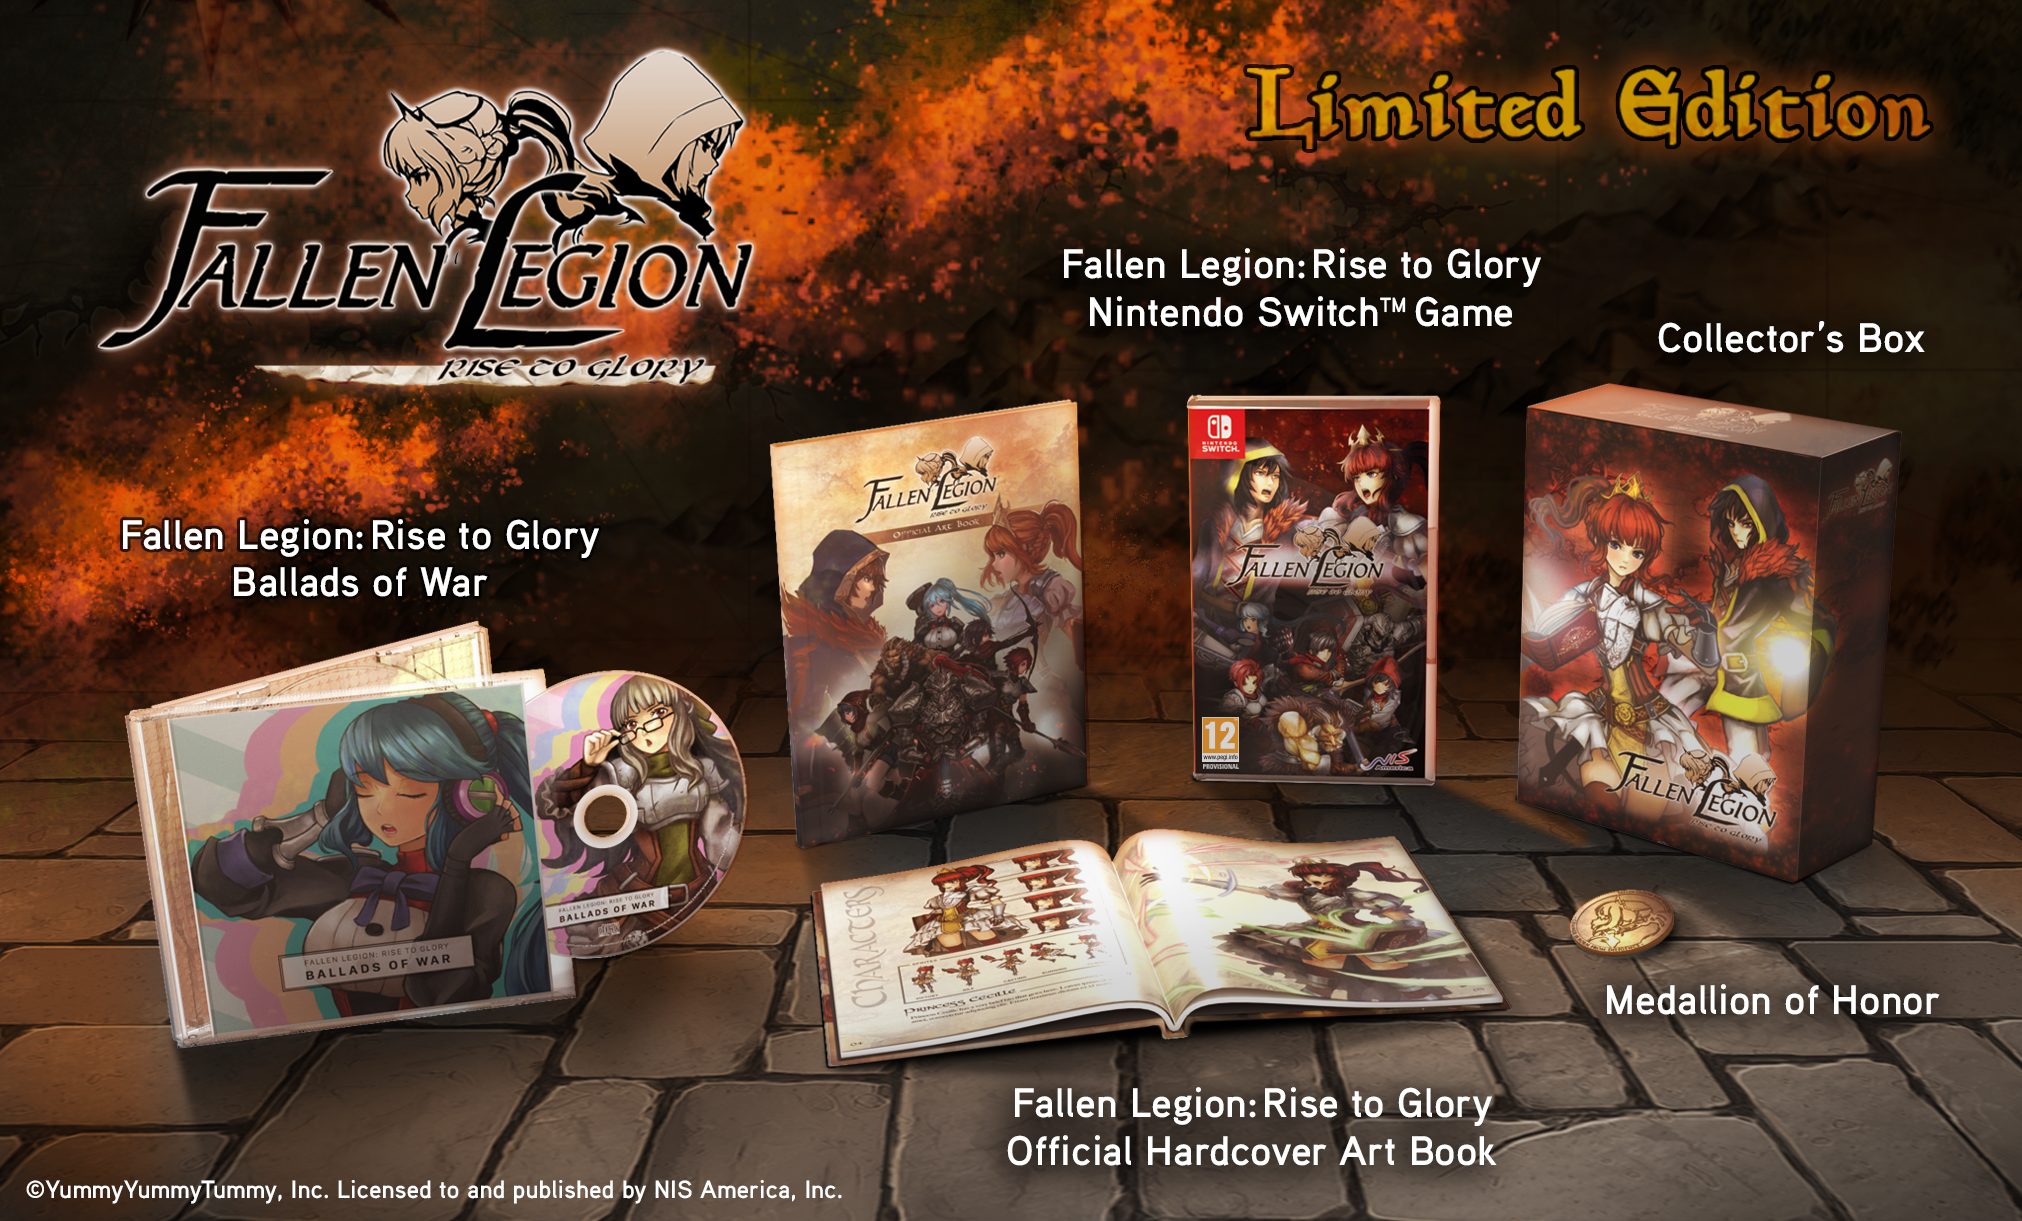 Fallen-Legion-Rise-to-Glory-Exemplary-Edition-Cont